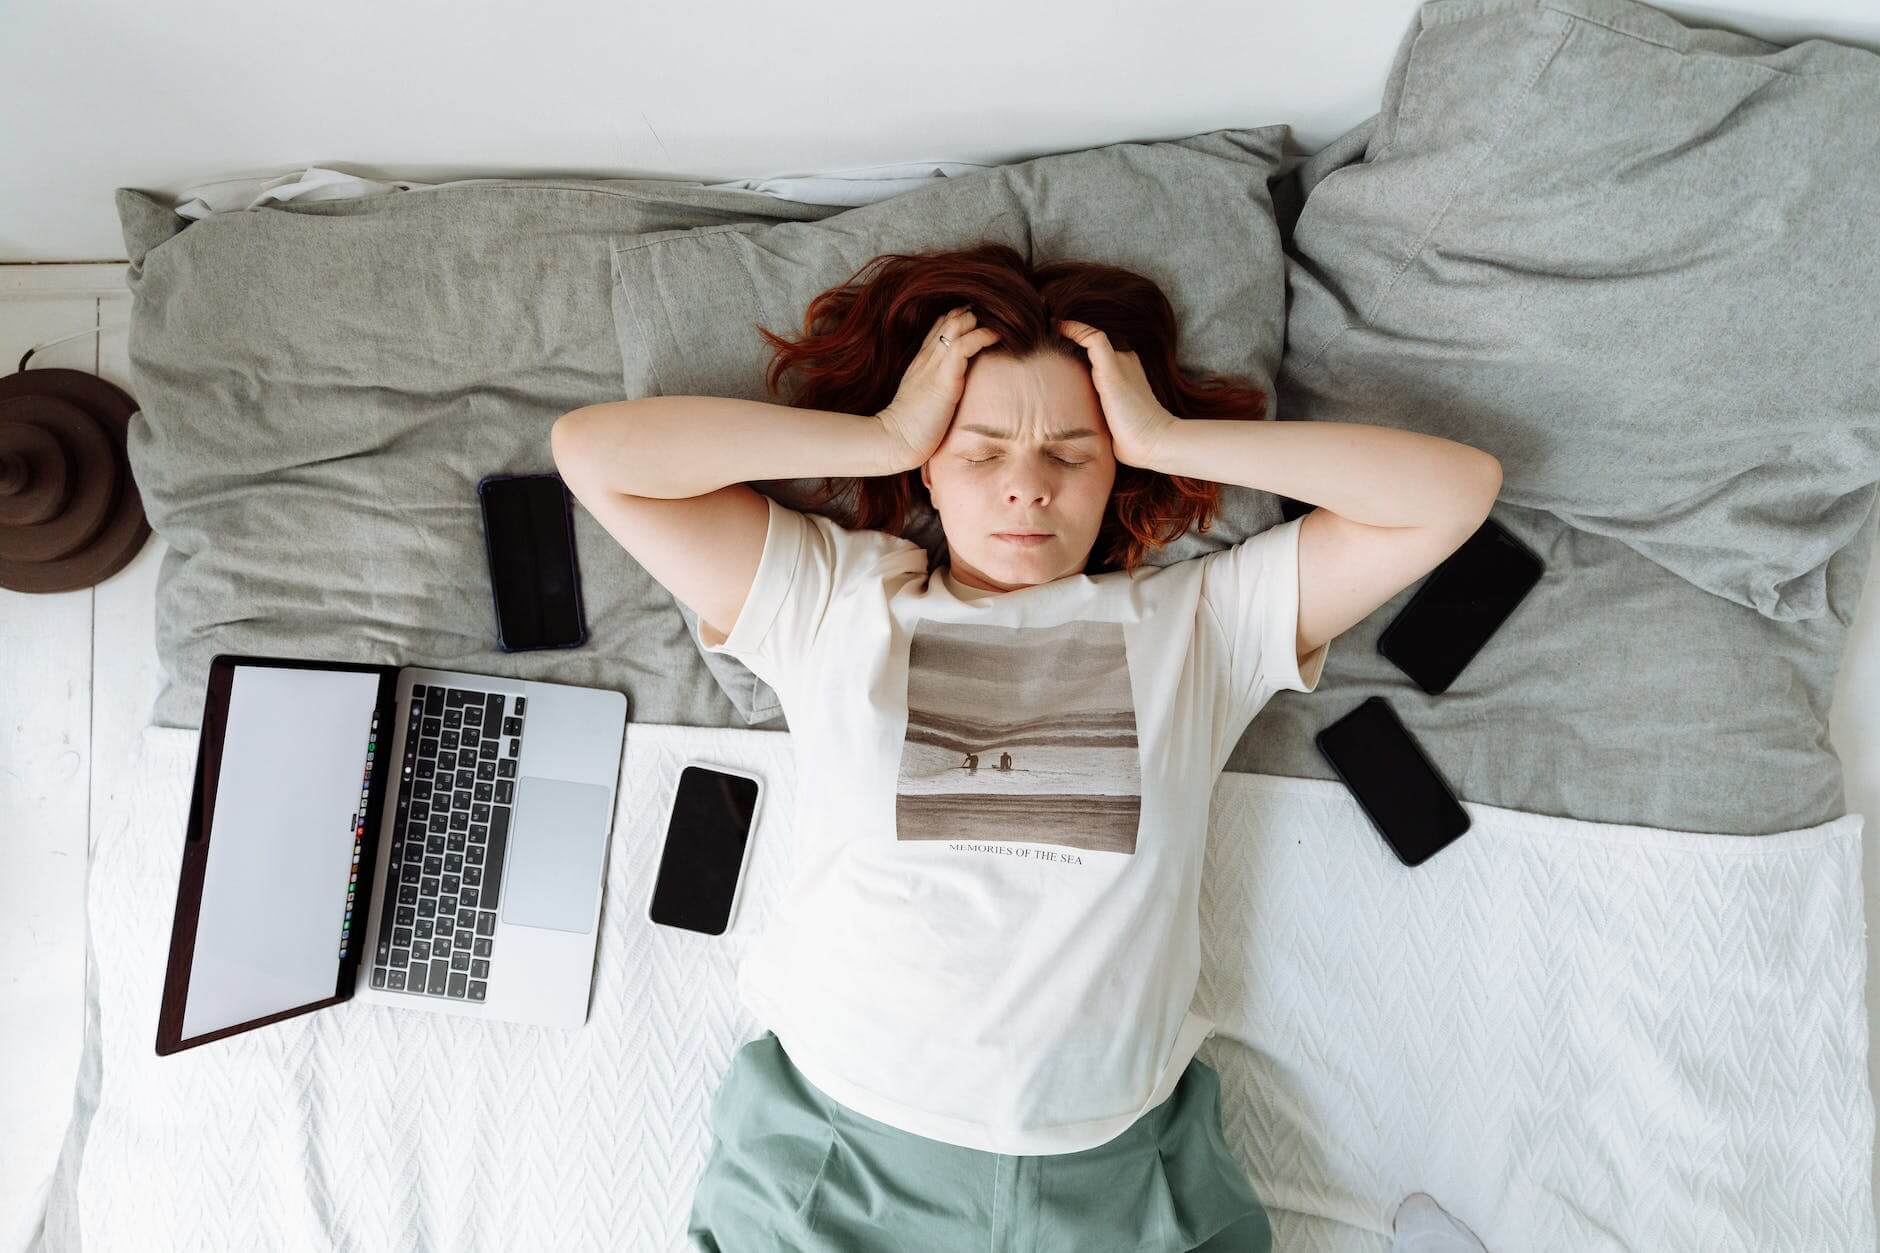 a stressed woman lying on a bed beside cellphones and a laptop